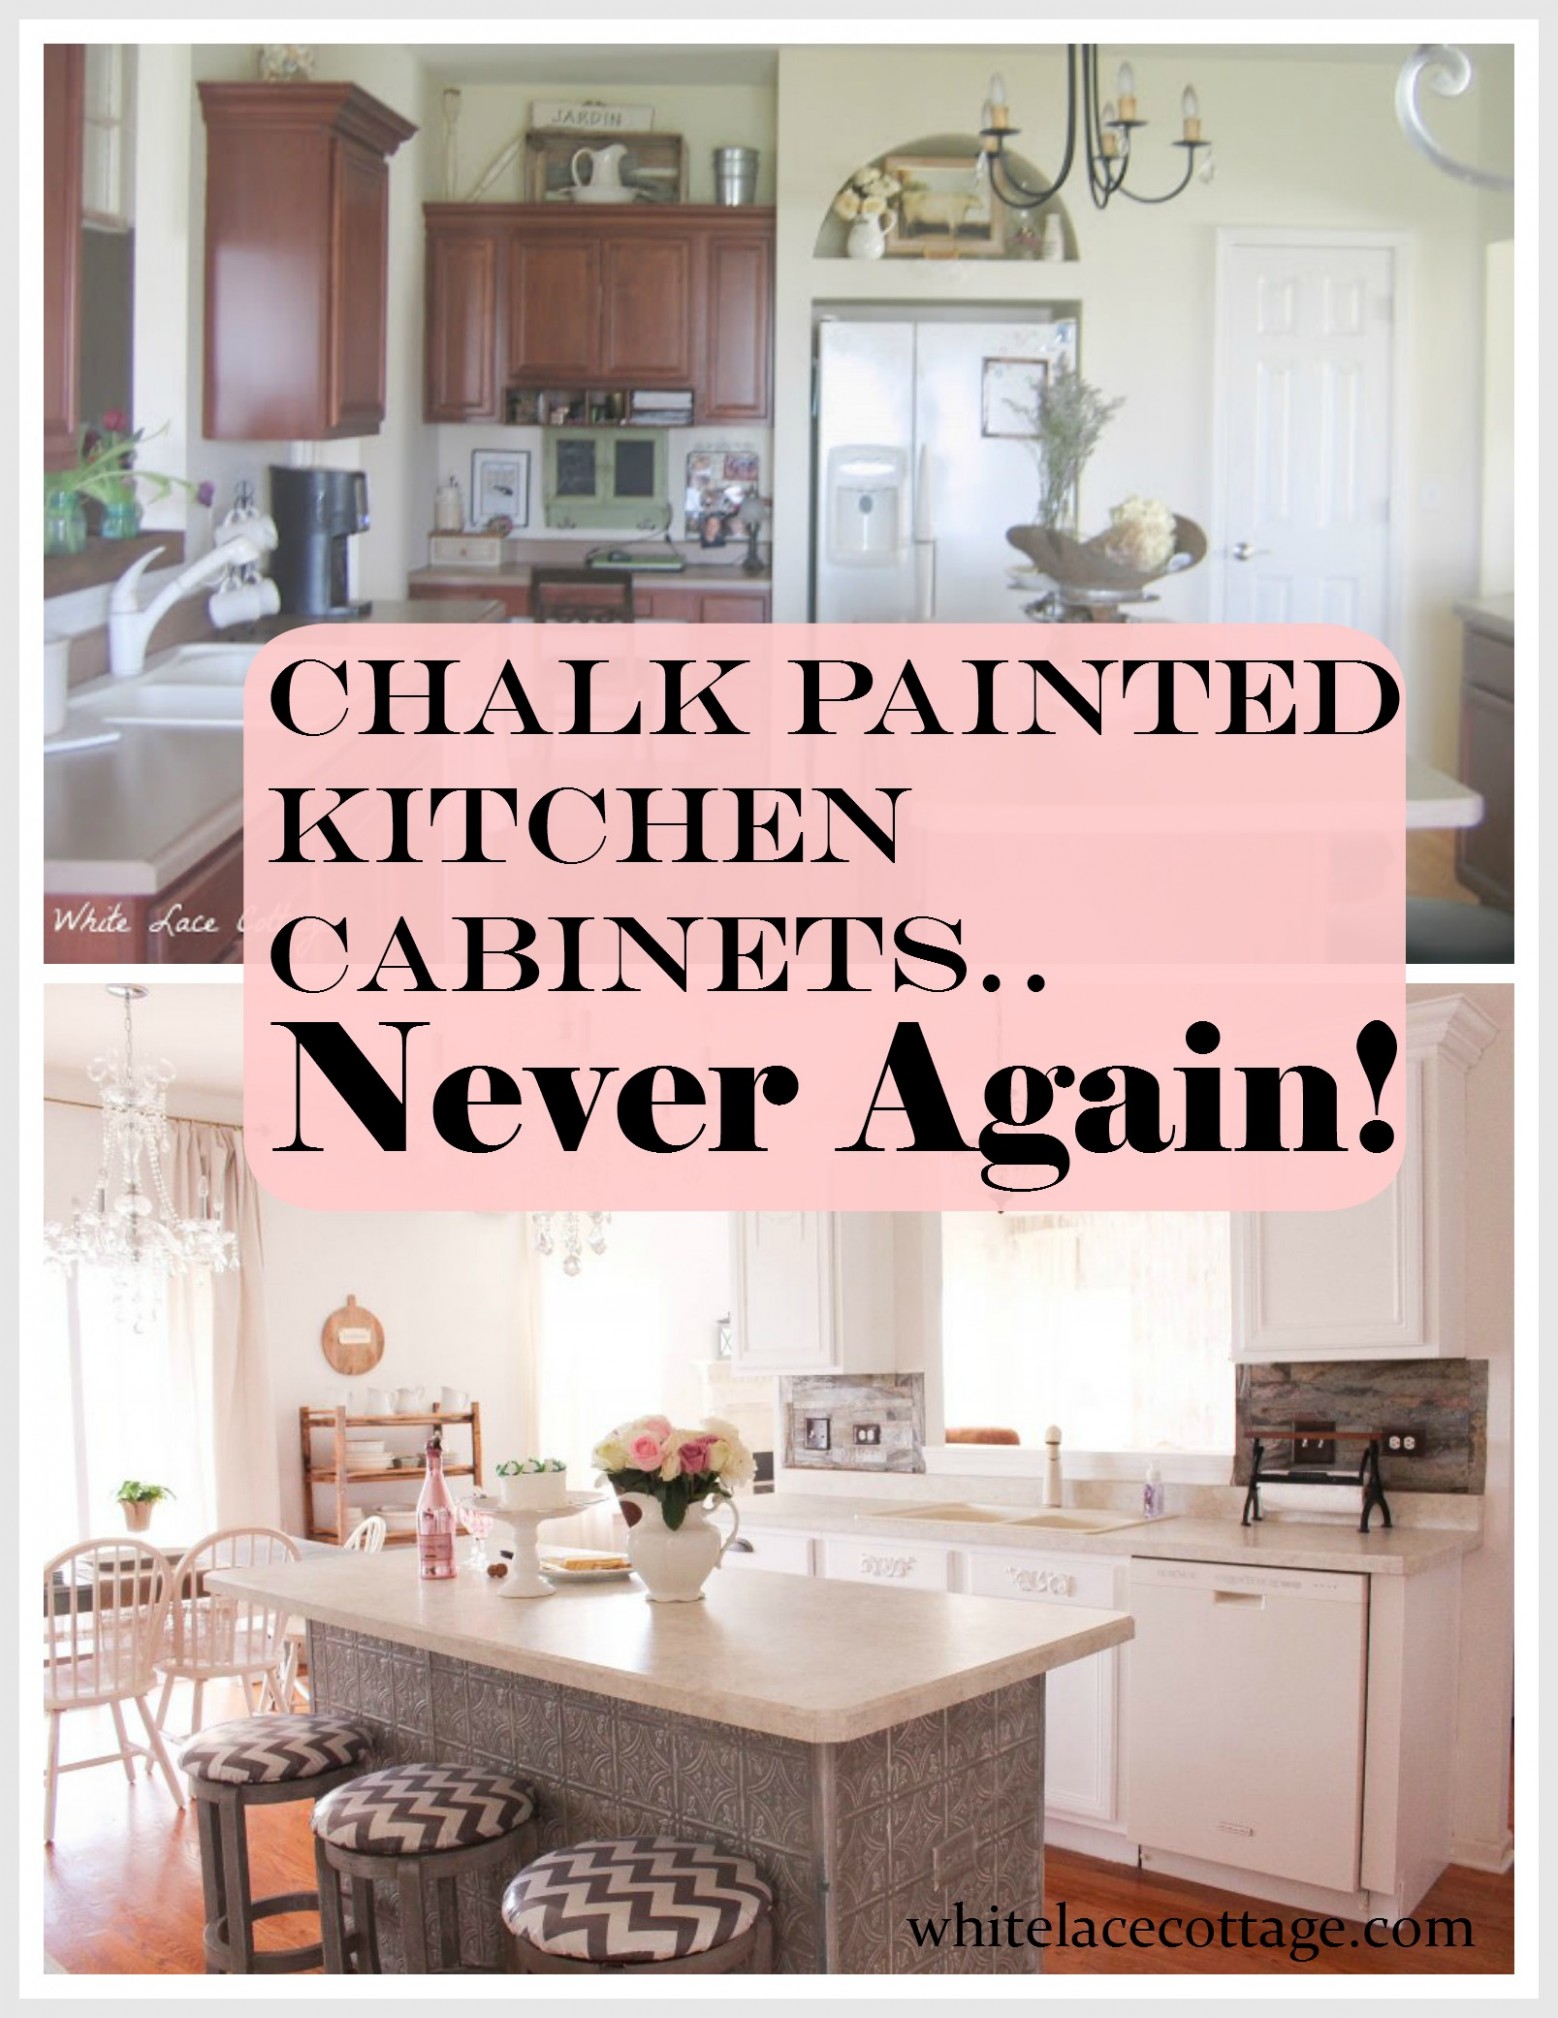 Chalk Painted Kitchen Cabinets Never Again! White Lace ..